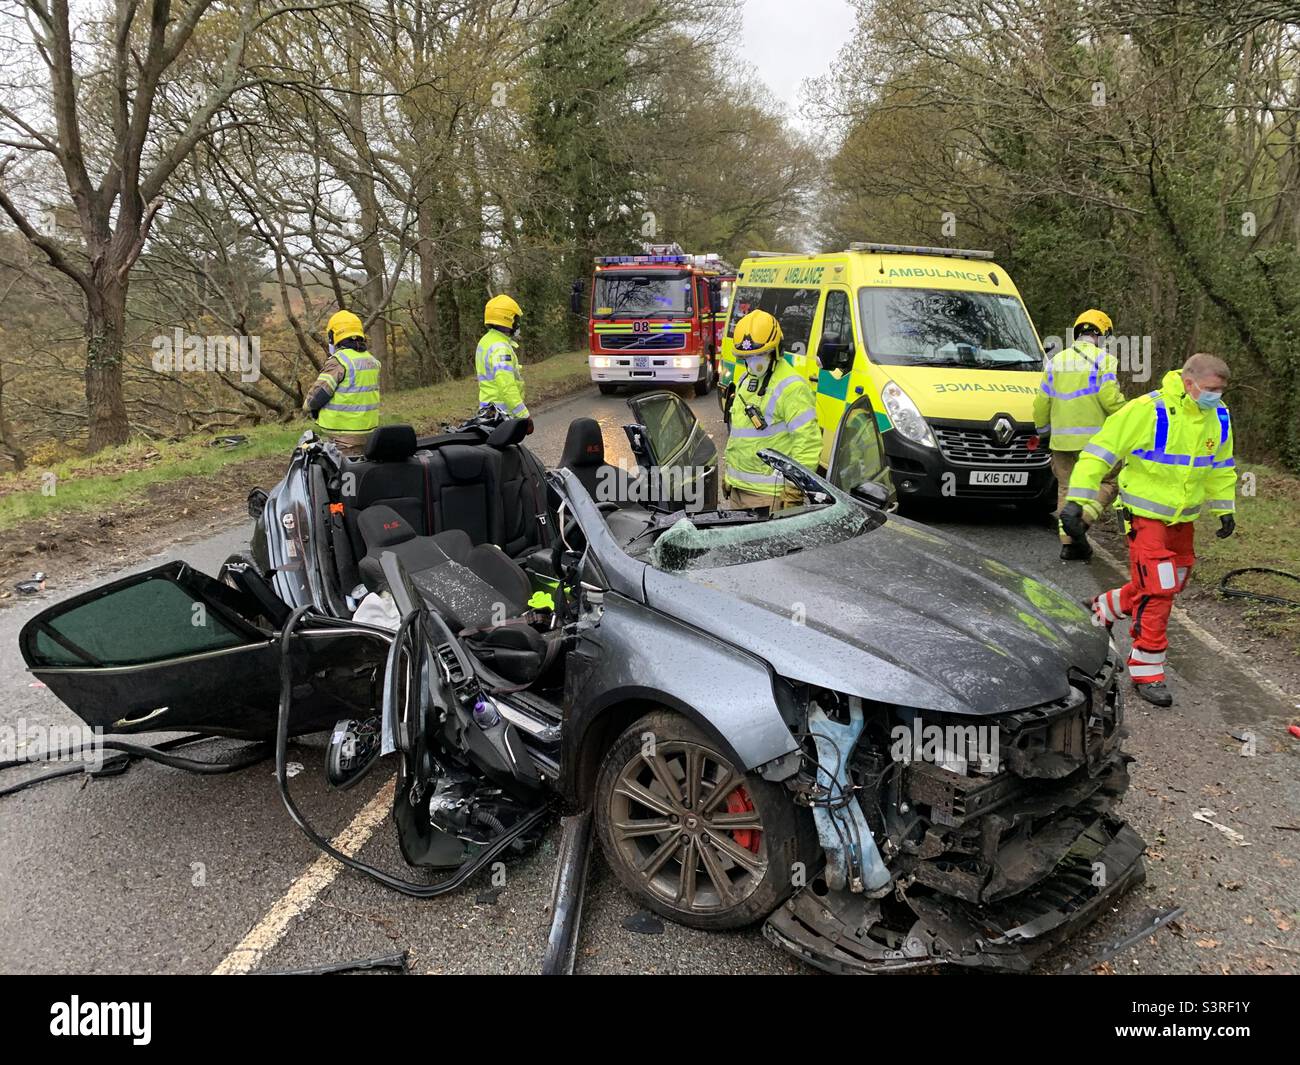 A car which is heavily damaged following a road traffic collision is surrounded by emergency service personnel. Stock Photo